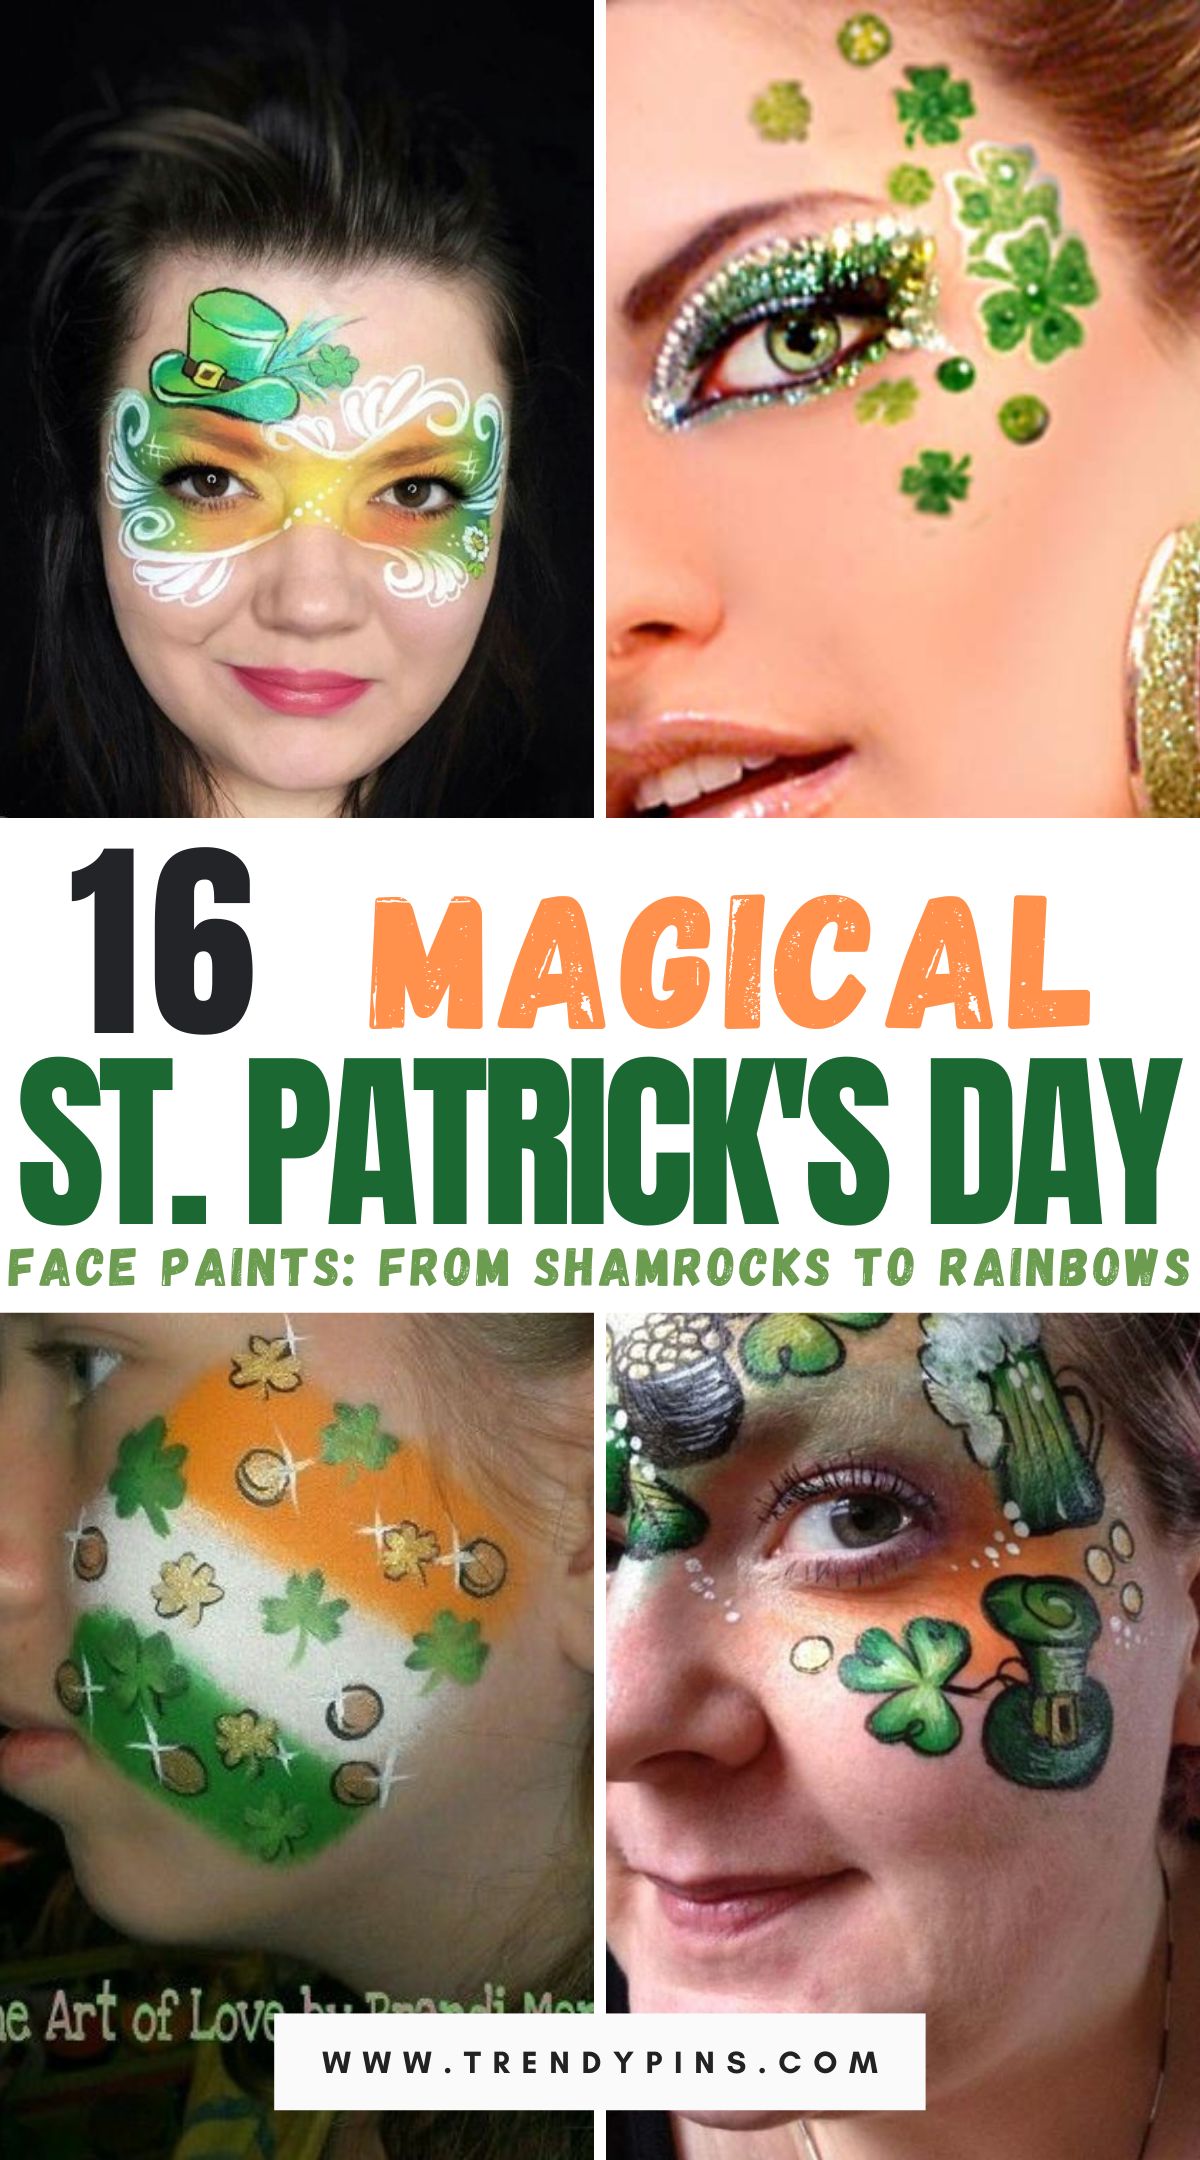 Unleash the magic of St. Patrick's Day with these 16 enchanting face paints, featuring everything from shamrocks to rainbows. Dive into a world of whimsy and celebration, ensuring your look shines as bright as a pot of gold at the end of the rainbow.